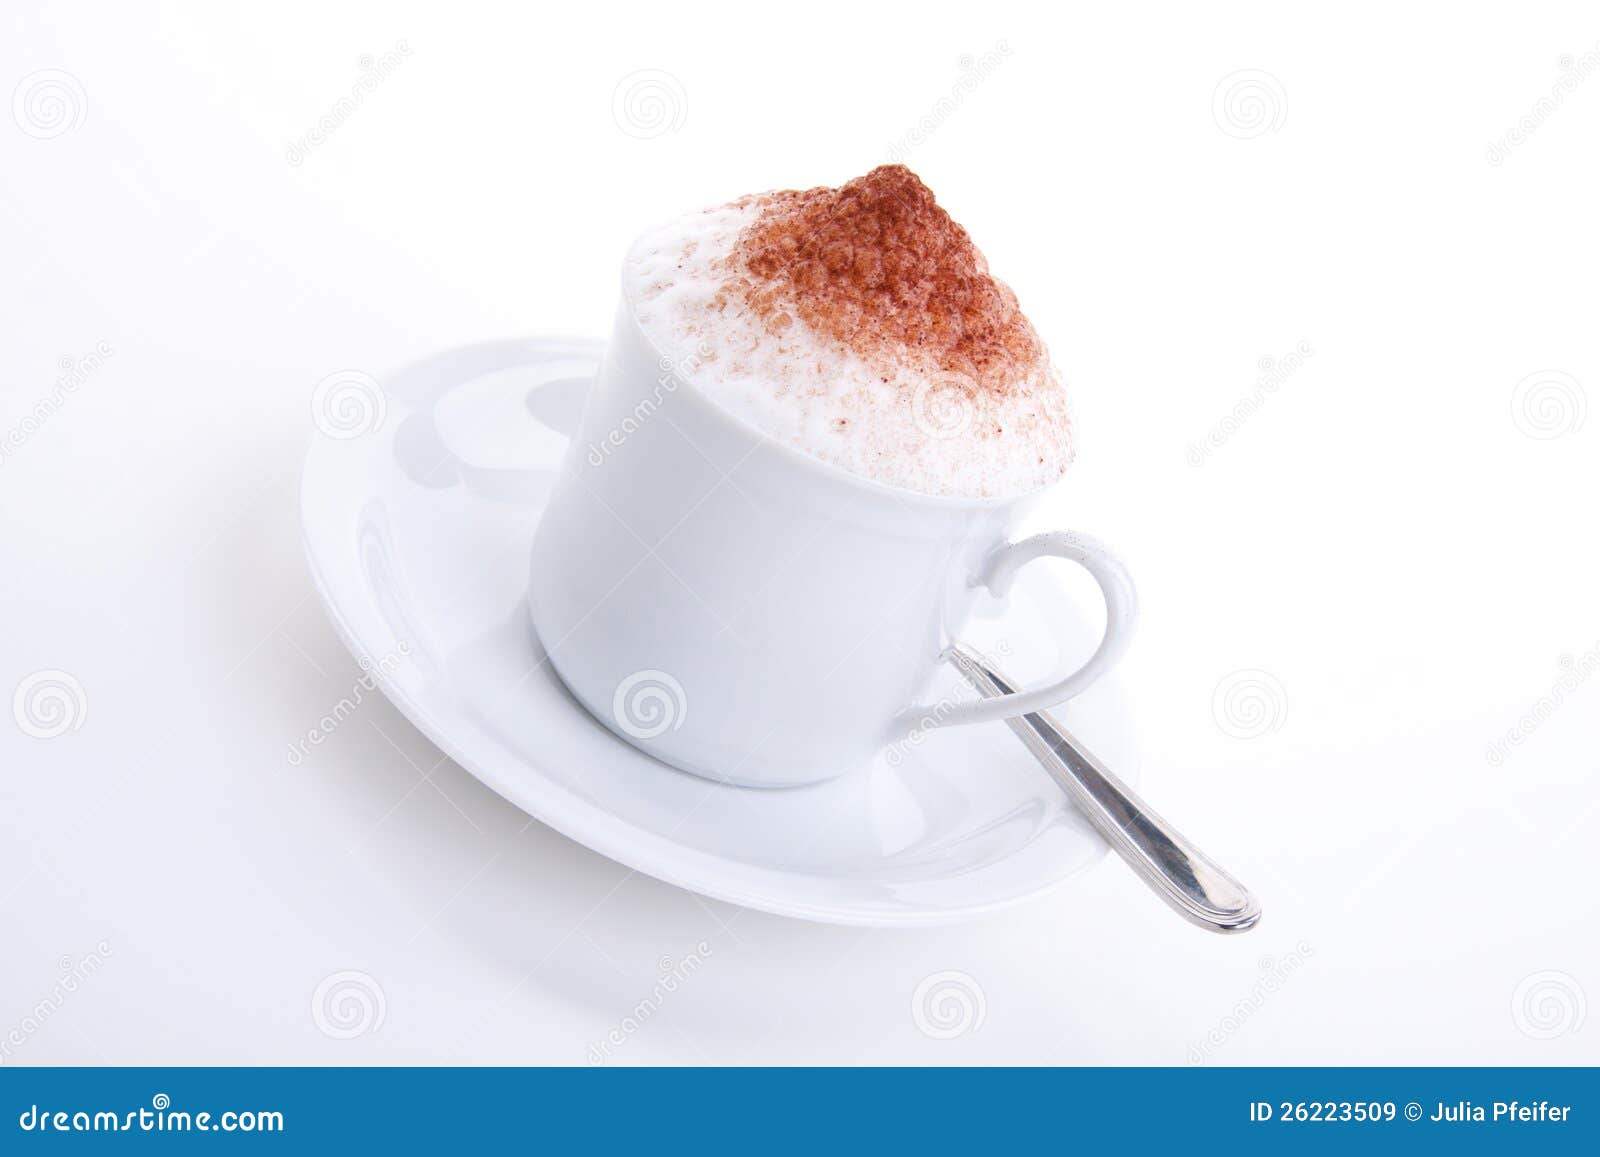 fresh capuccino with chocolate and milk foam